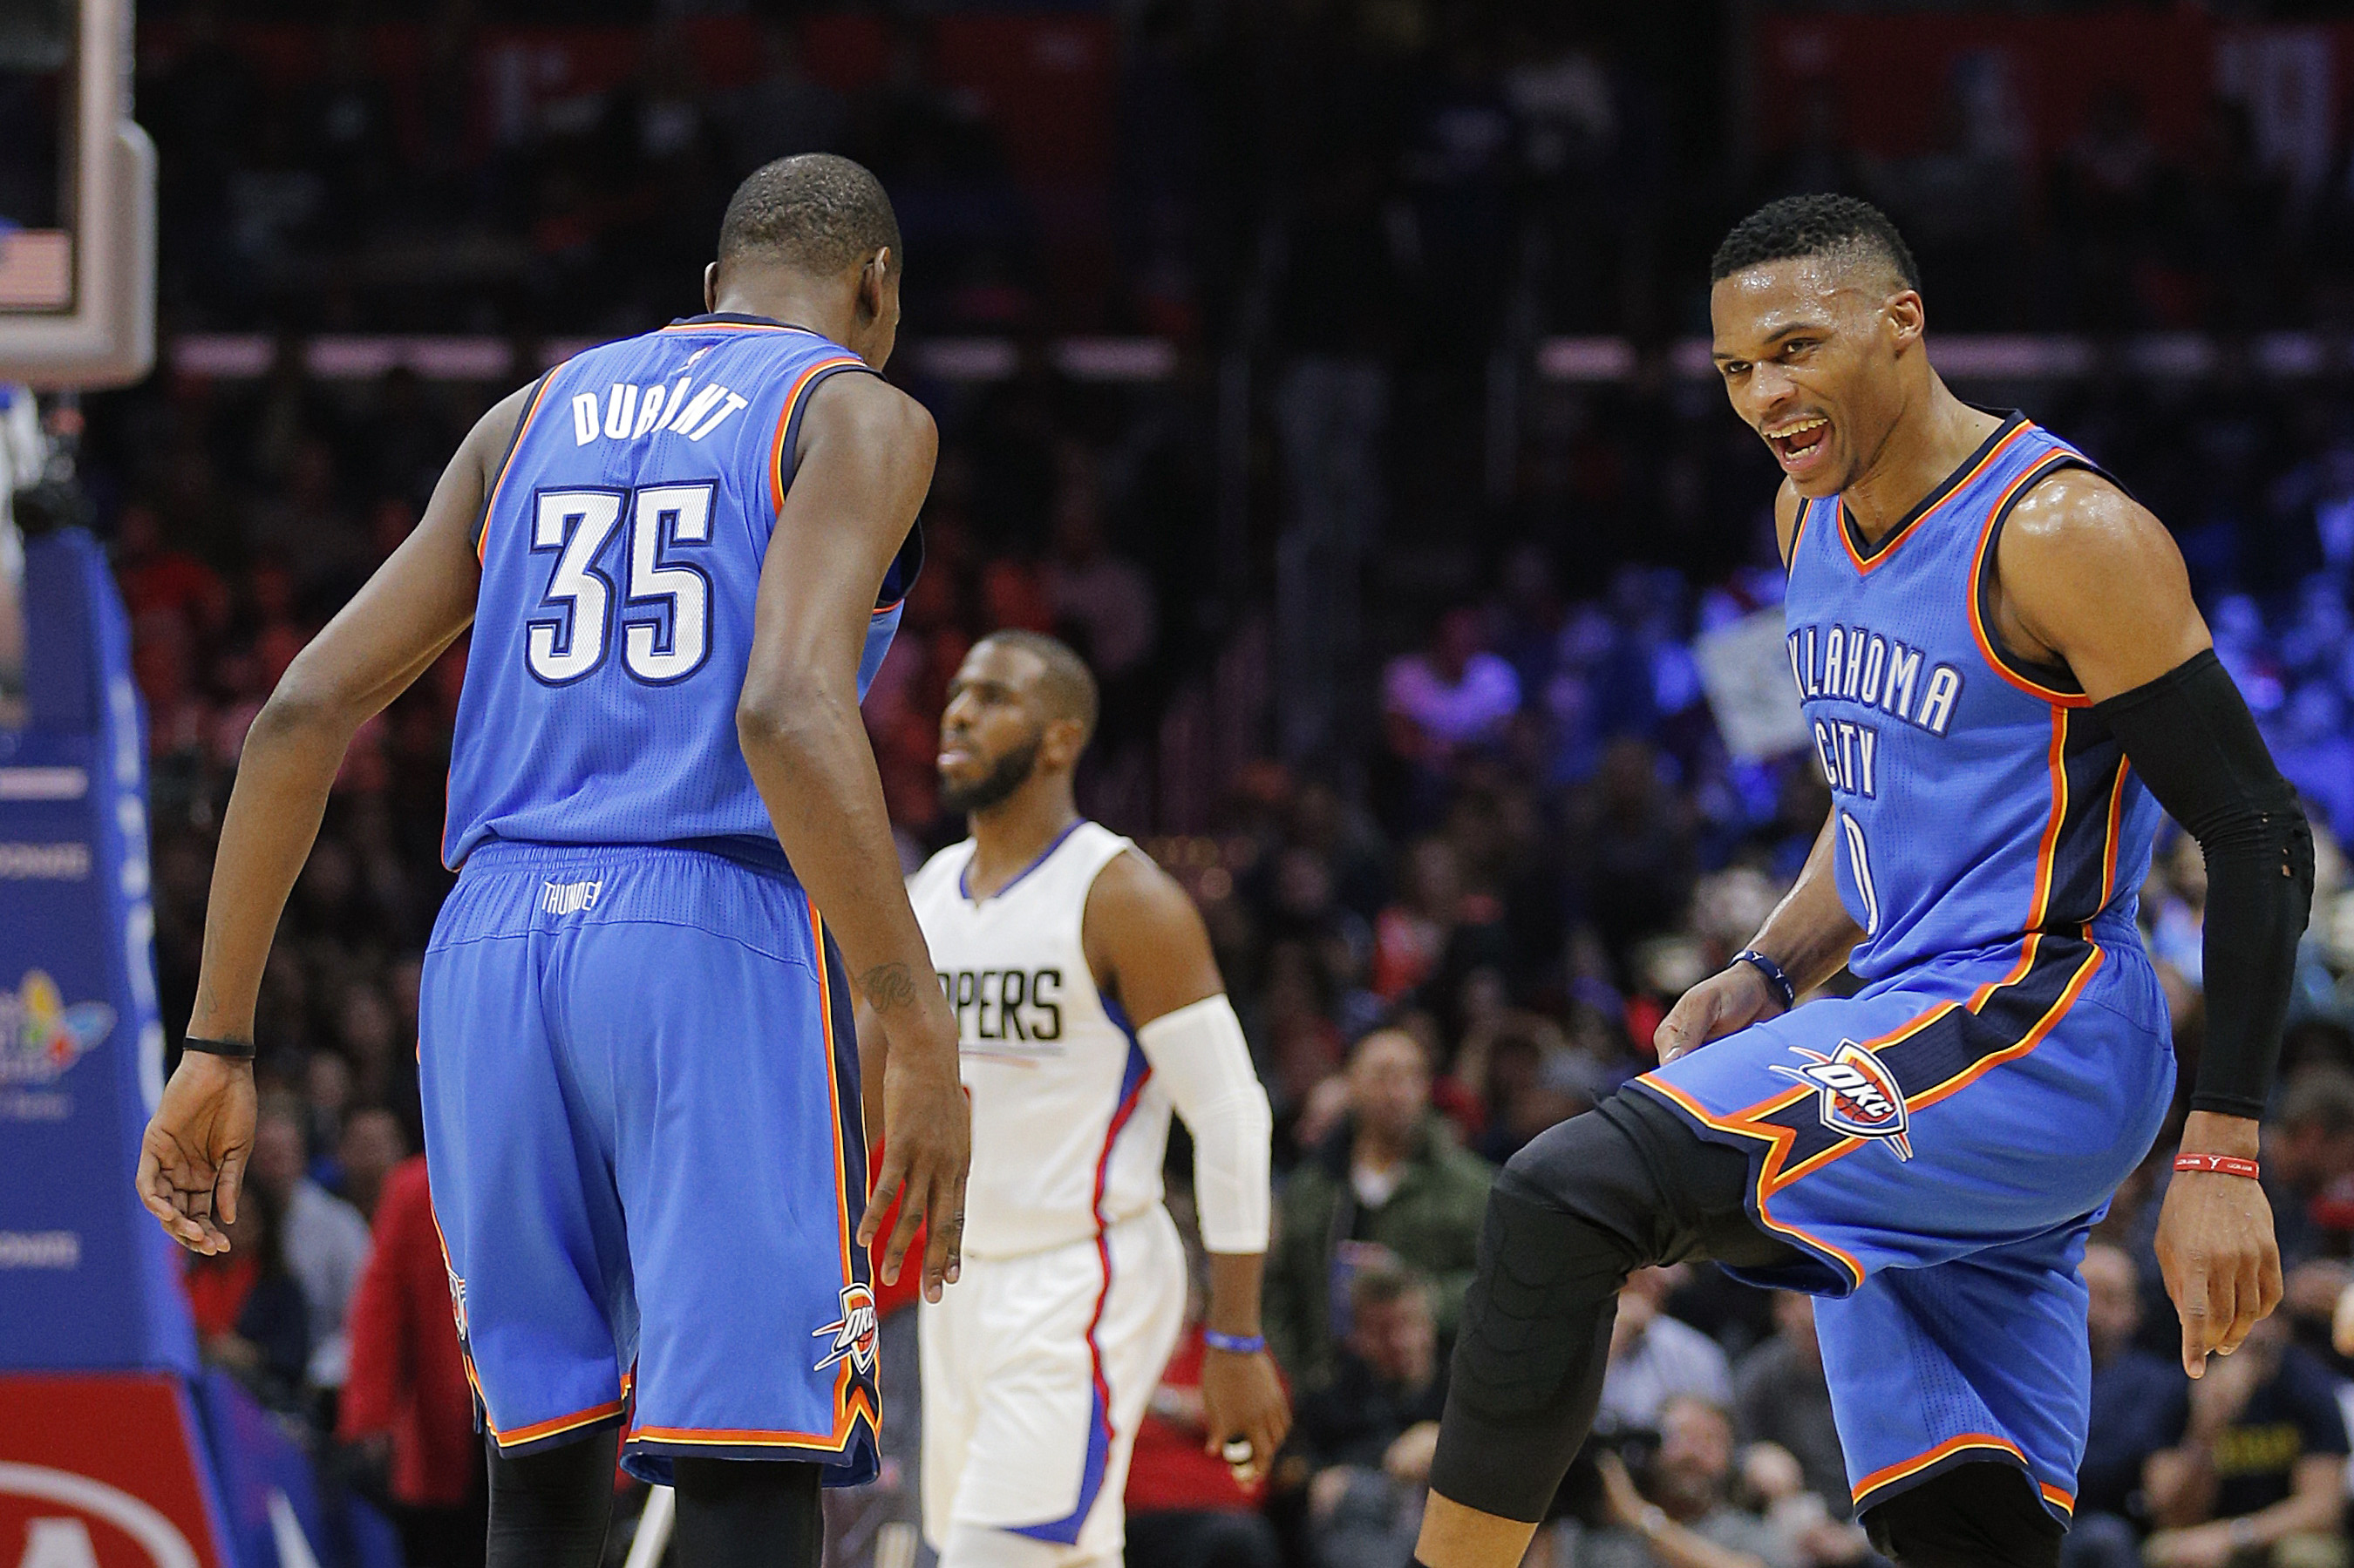 Russell Westbrook's greatness shouldn't diminish Oscar Robertson